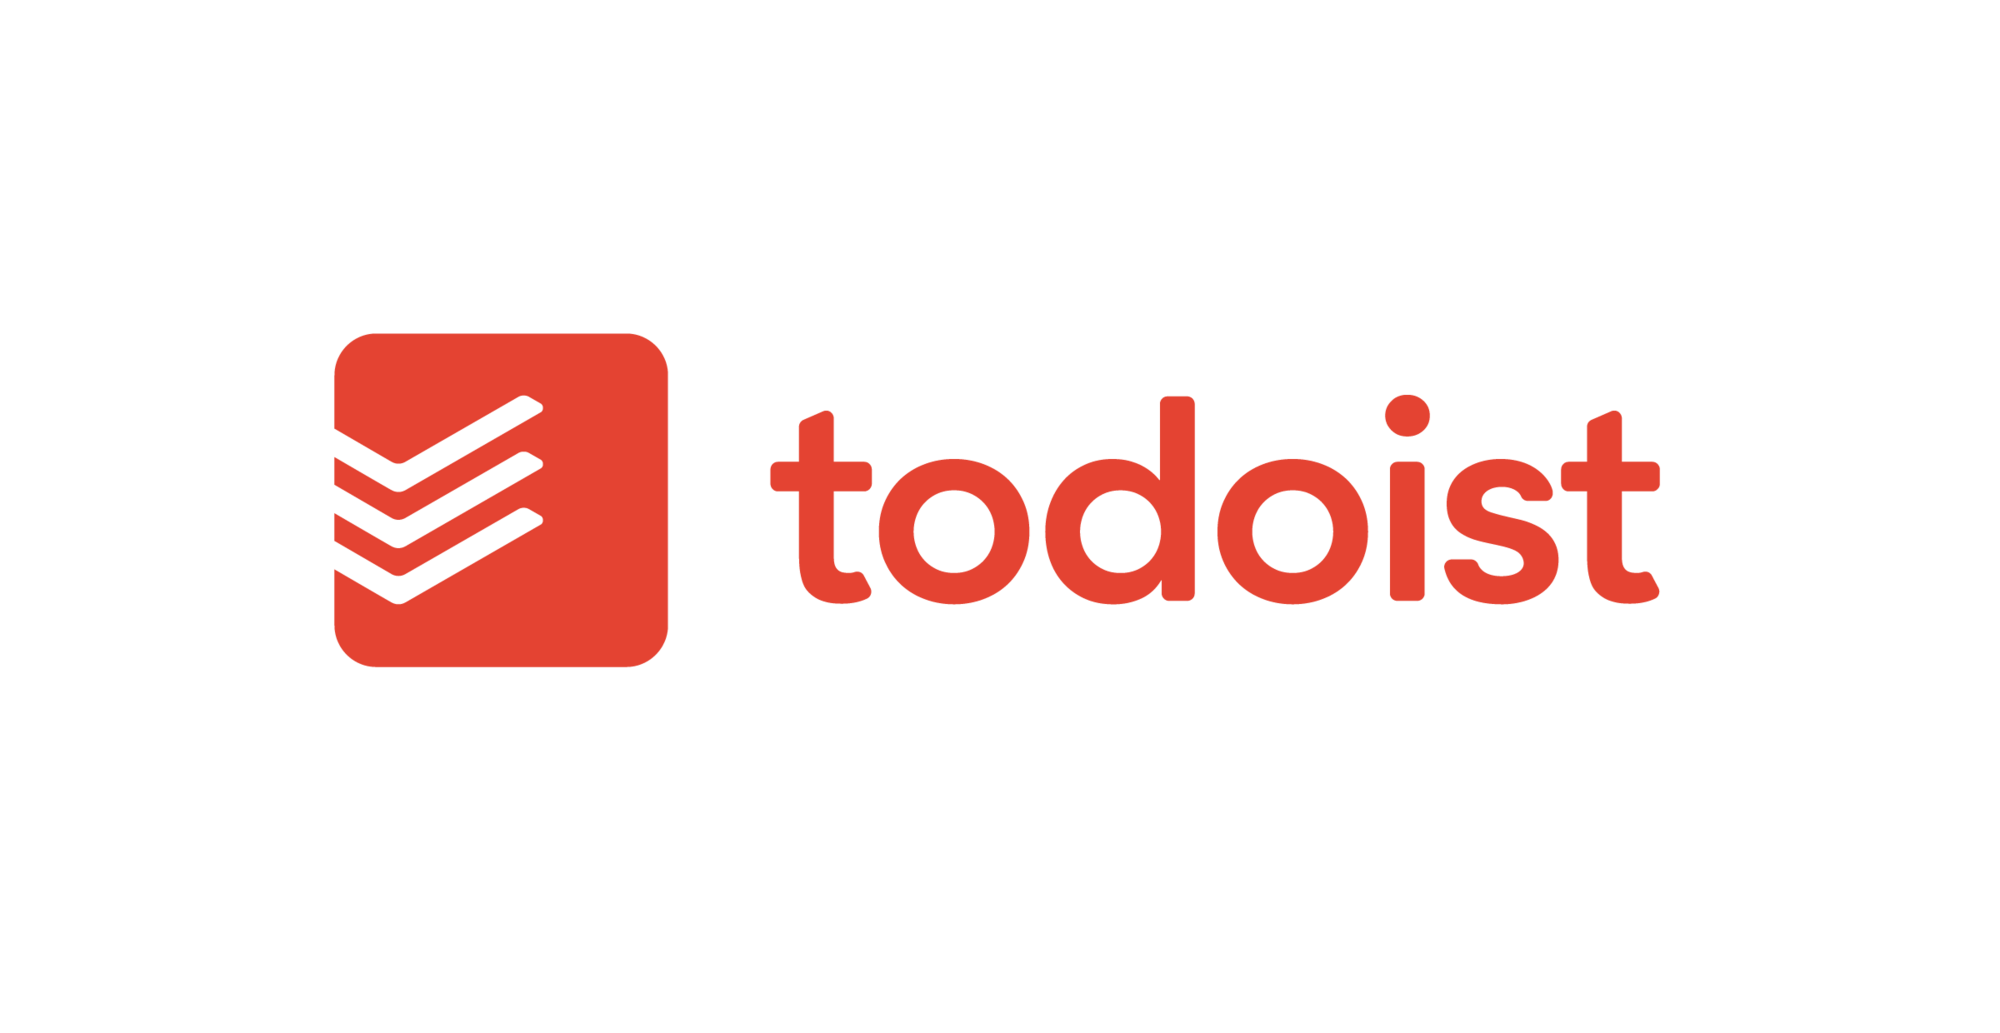 Image of the Todoist logo